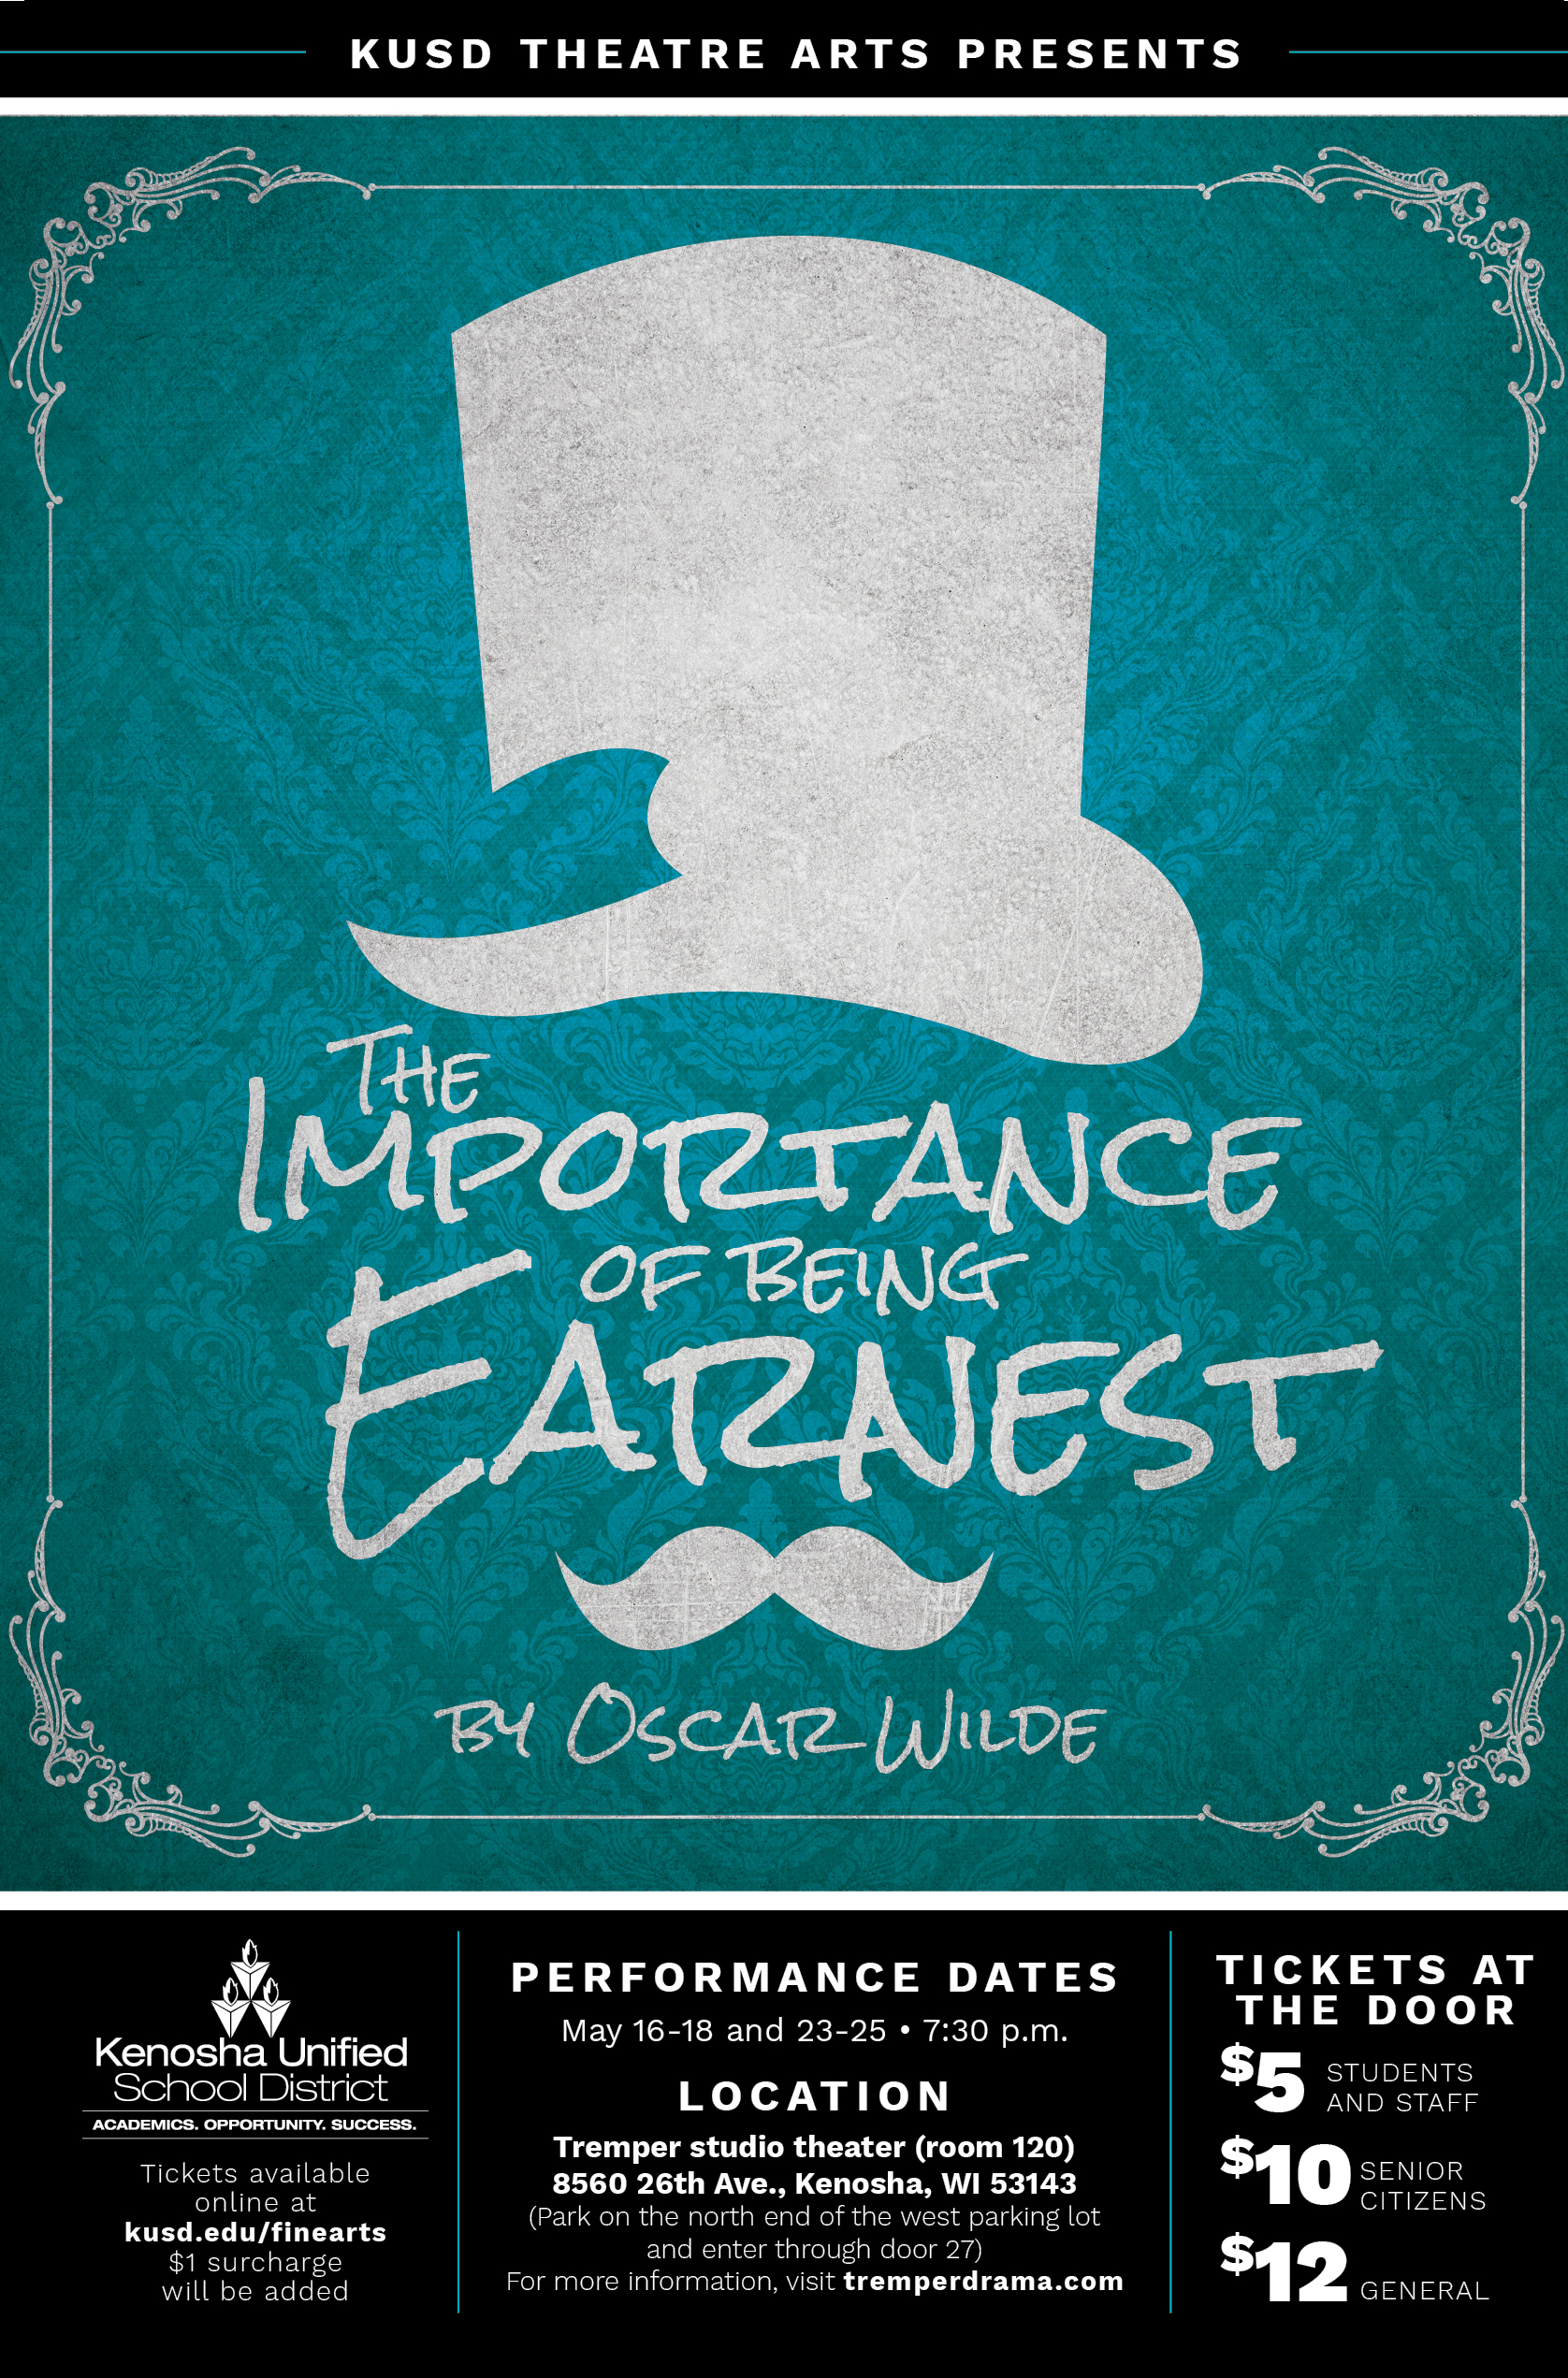 The poster for The Importance Of Being Earnest